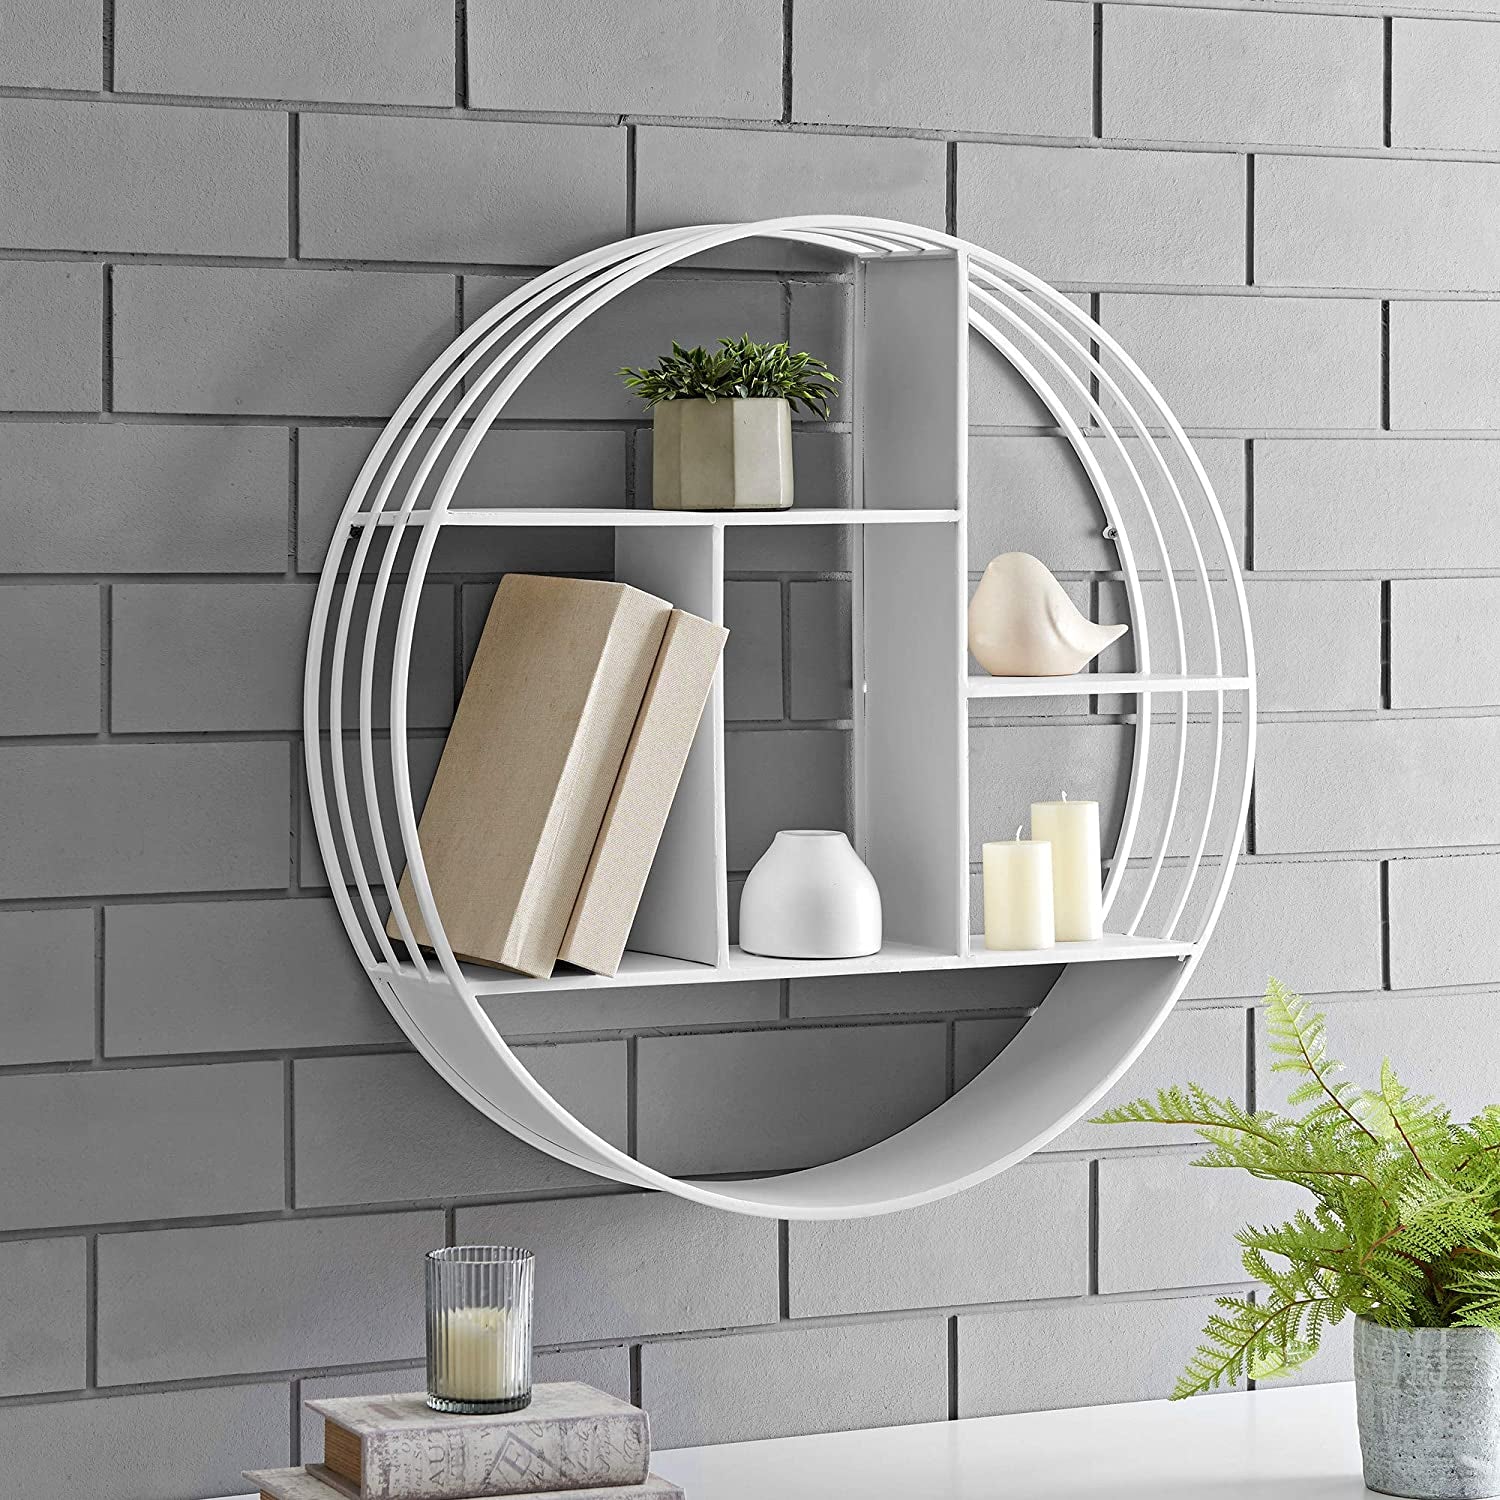 White Brody Wall Shelf, round 3 Tier Wall Mounted Floating Shelf for Bathroom, Bedroom, Living Room Decor, Metal, Industrial, 27.5 Inches